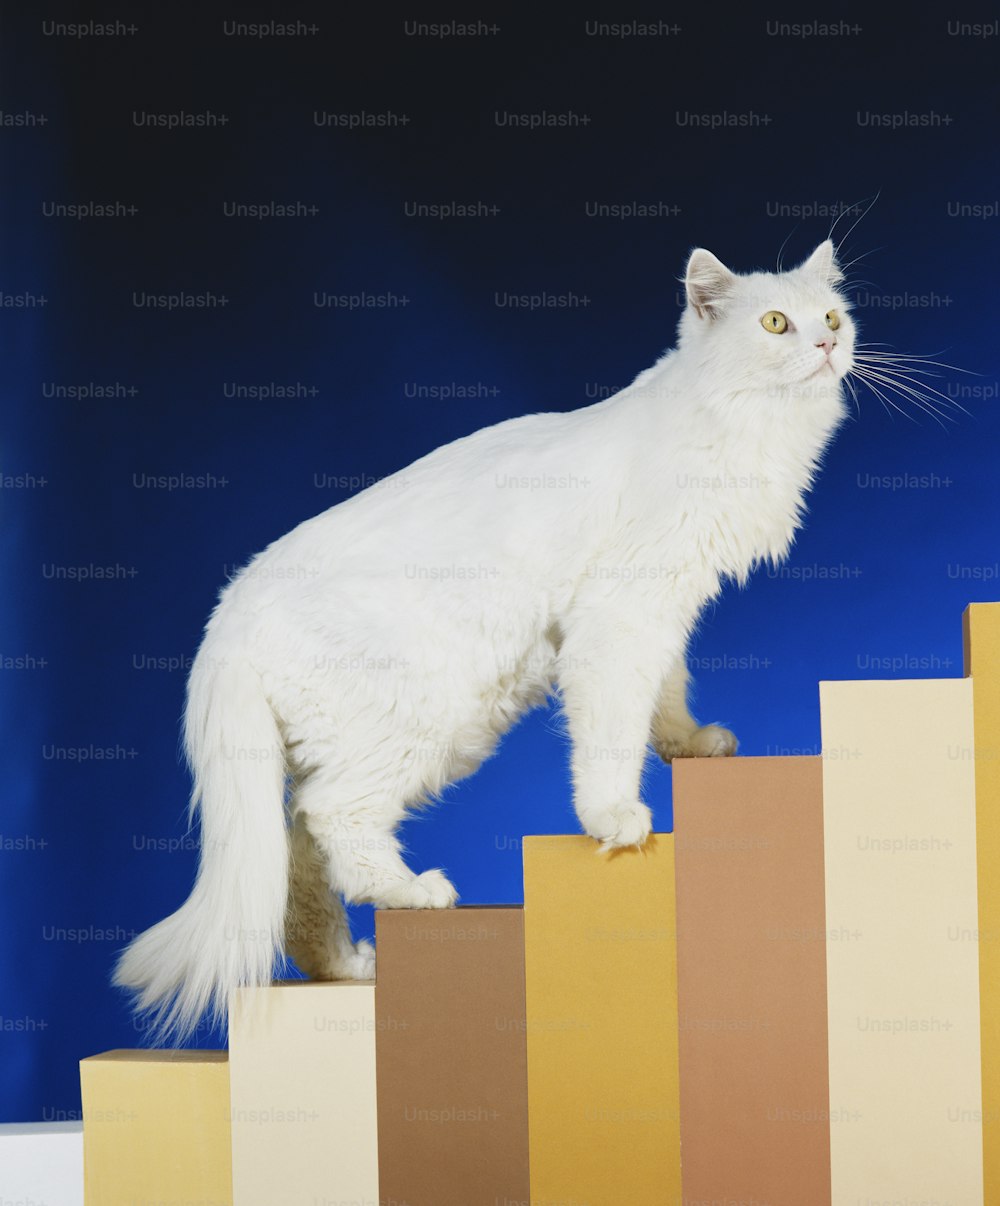 a white cat standing on top of a bar chart